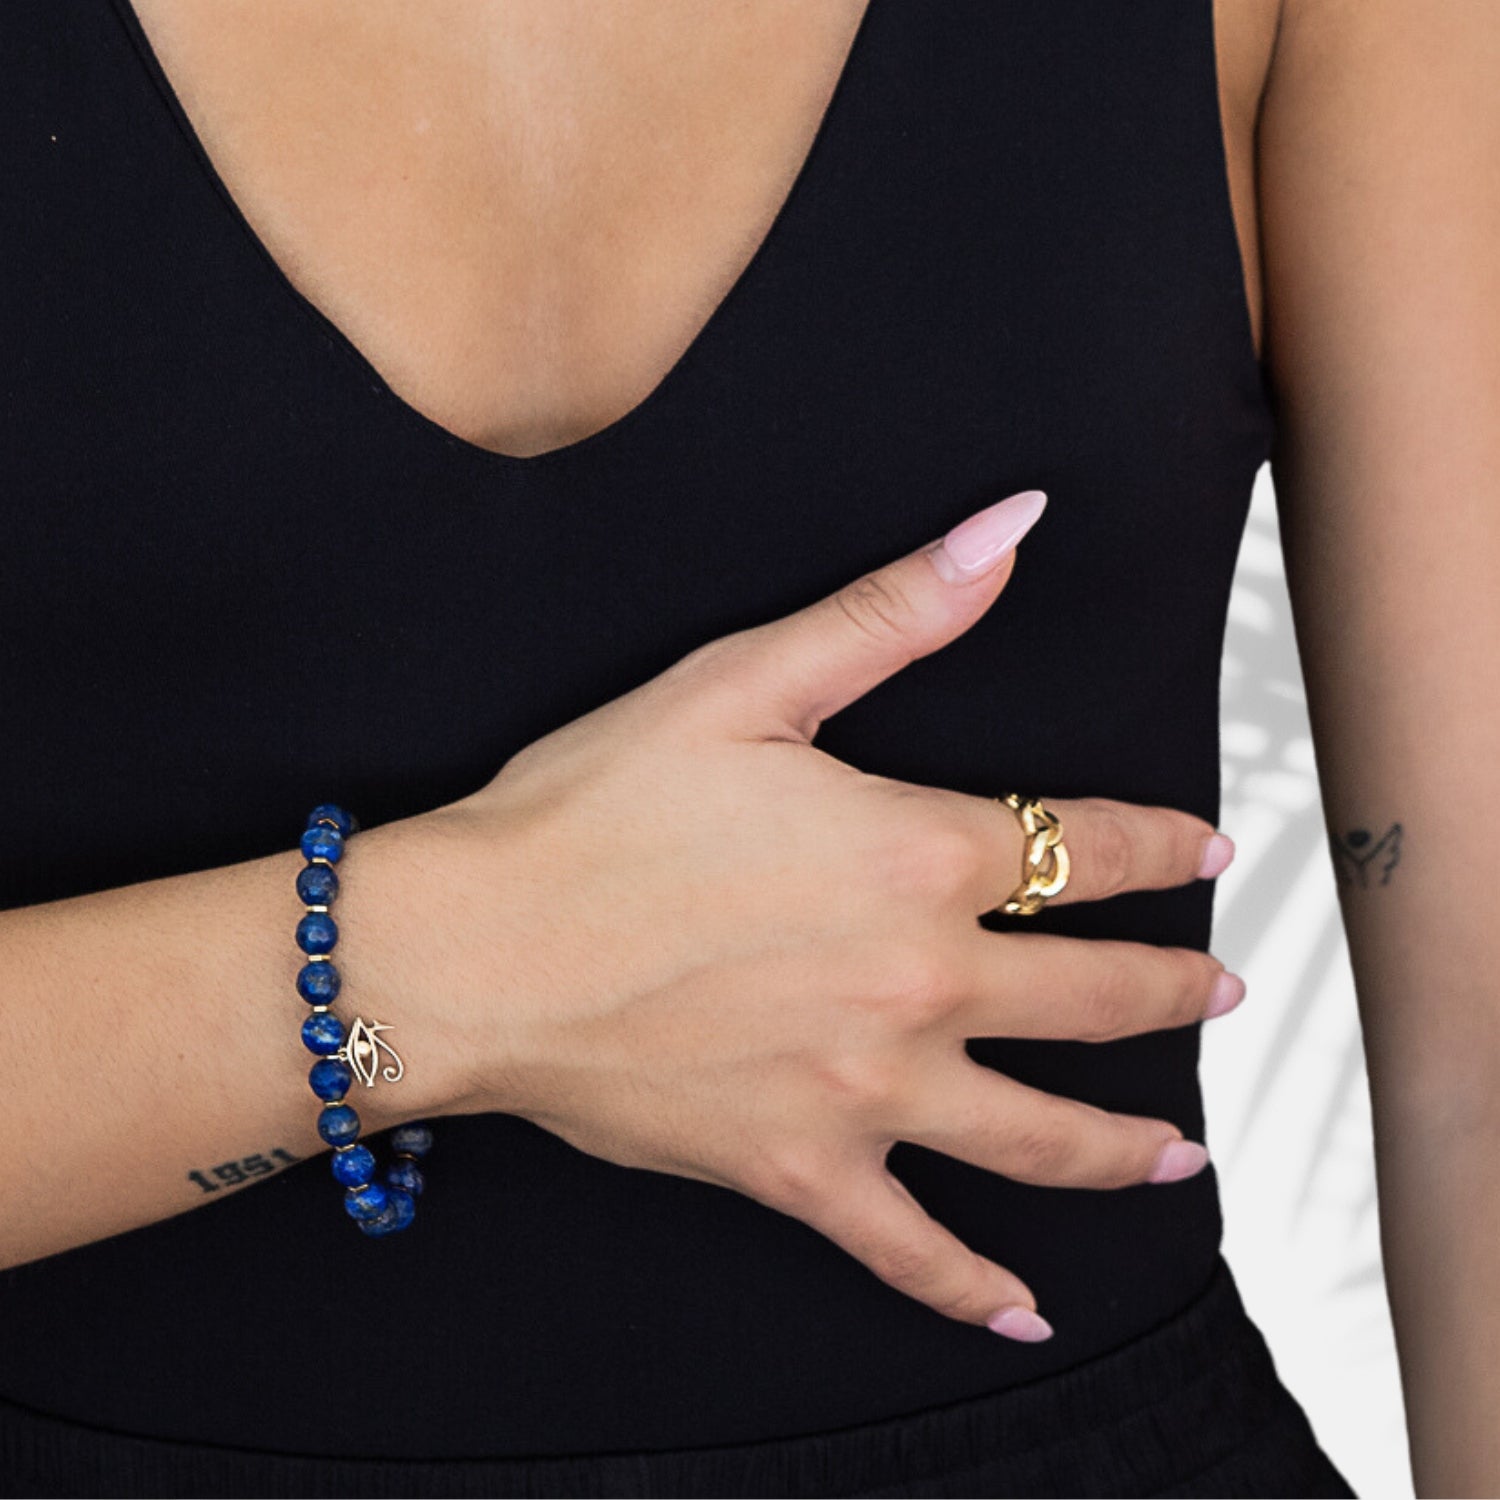 The hand model showcases the elegance and spirituality of the Solid Gold Eye of Ra Spiritual Beaded Bracelet, embodying the divine connection with the Eye of Ra symbol.